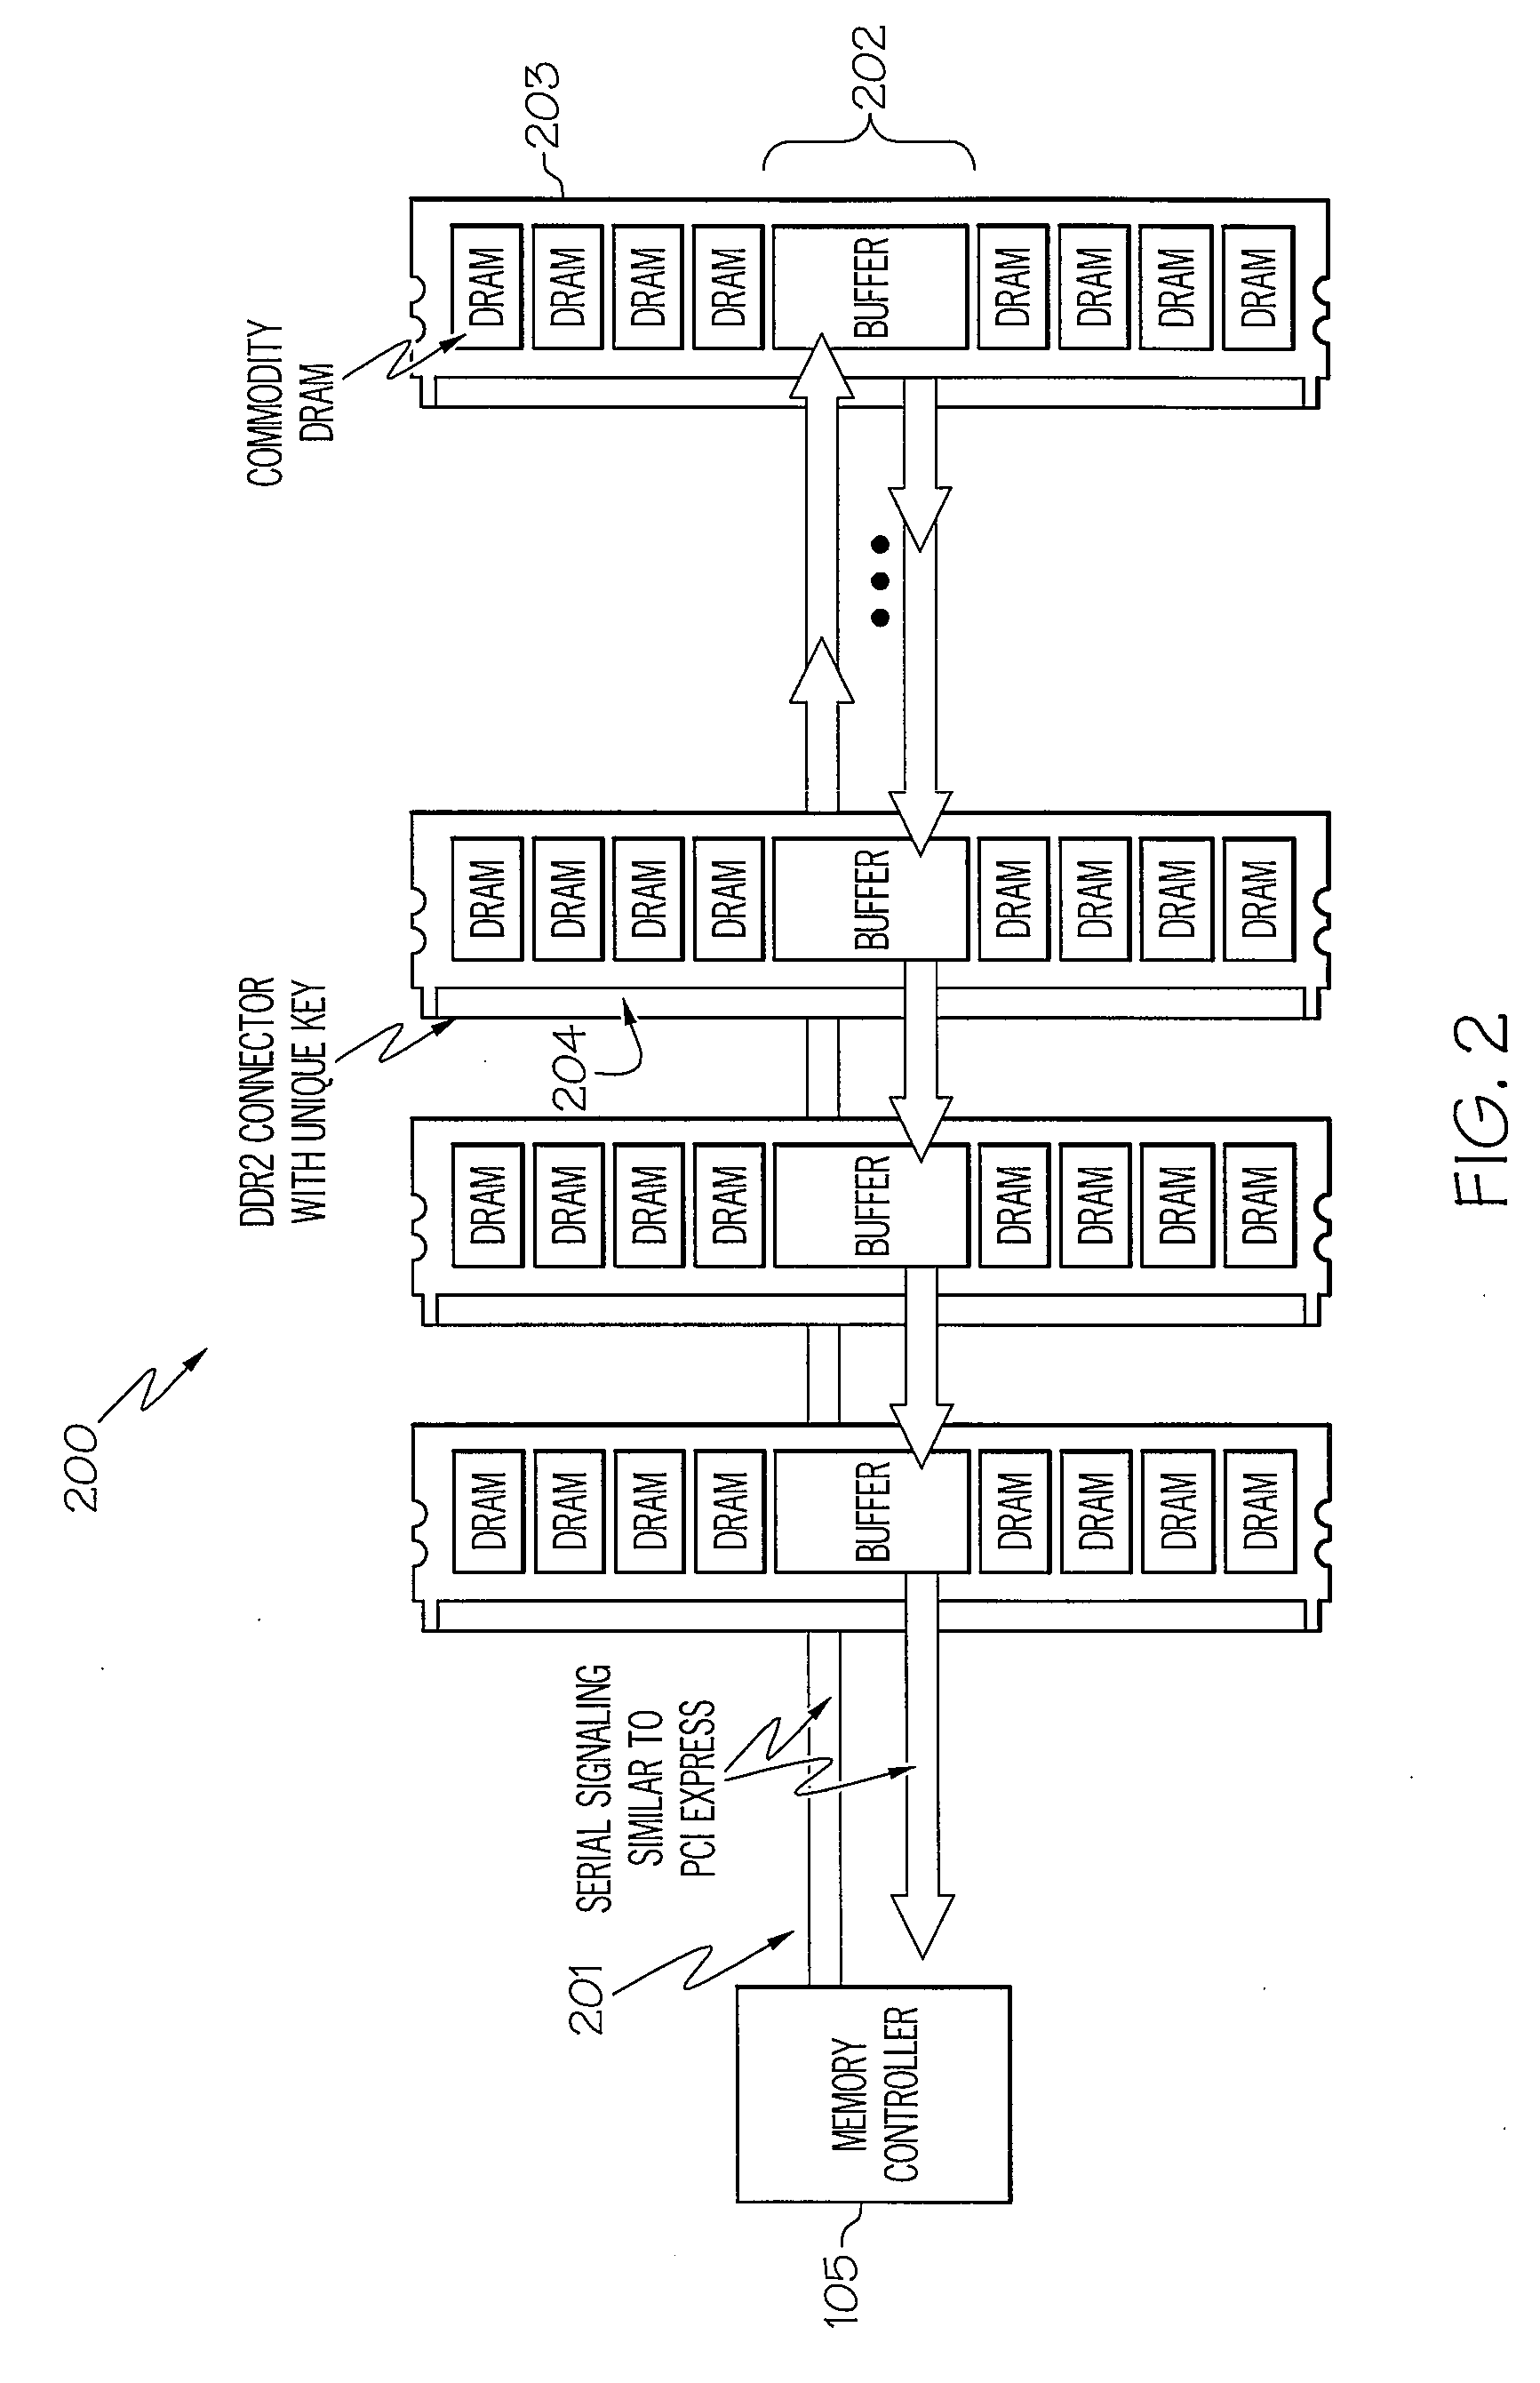 Data bus bandwidth scheduling in an fbdimm memory system operating in variable latency mode